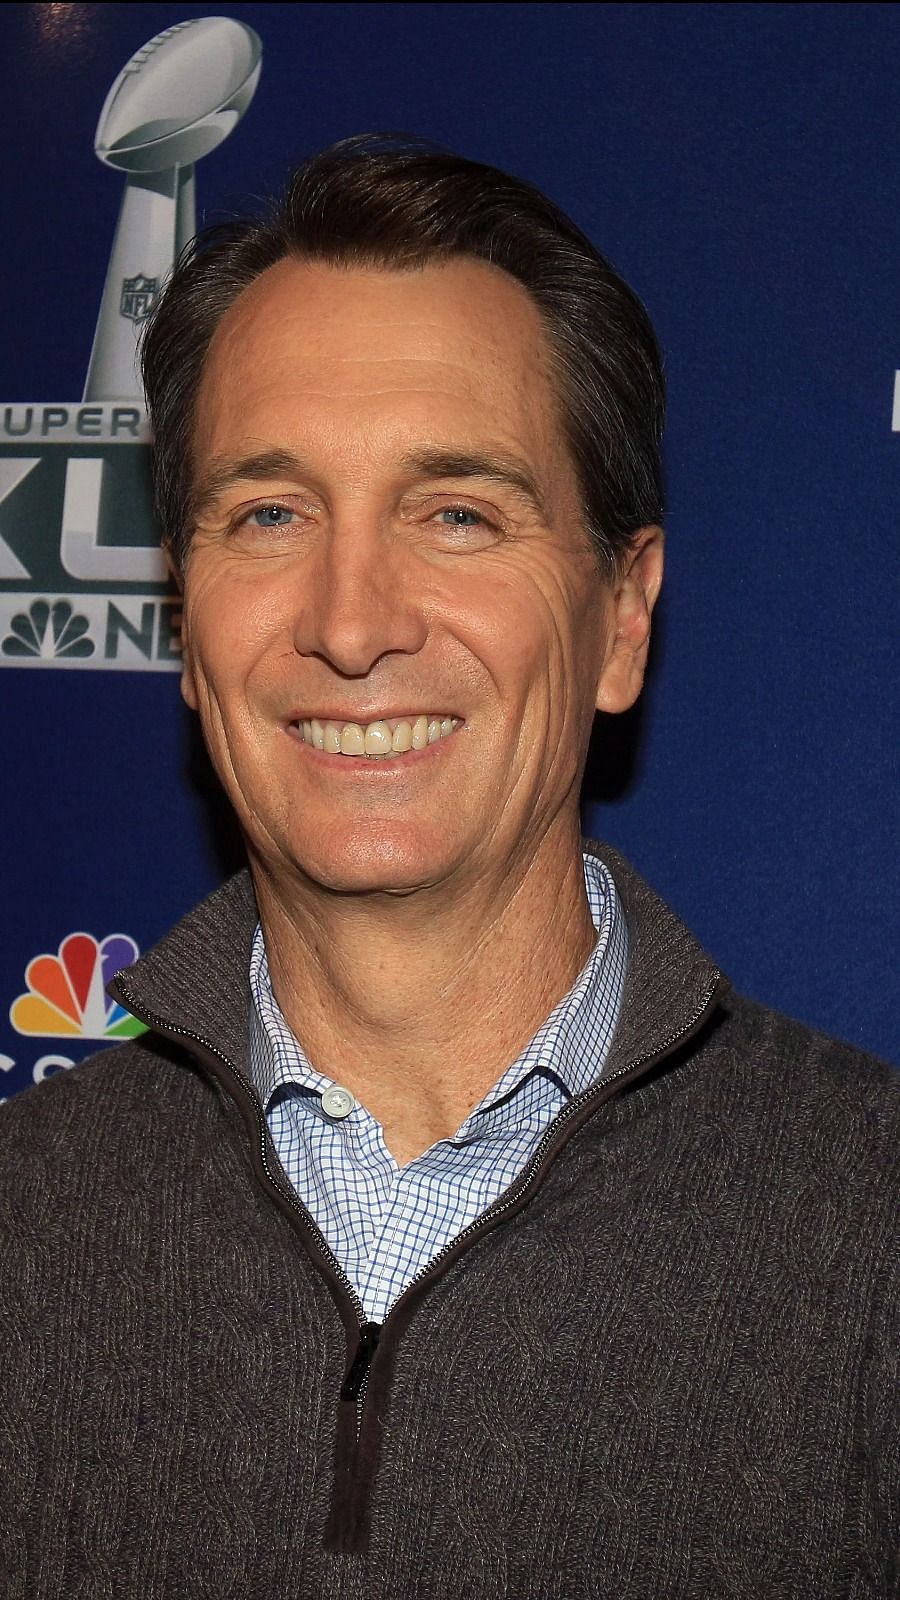 Cris Collinsworth, PFF staff weigh in on KC Chiefs offseason moves